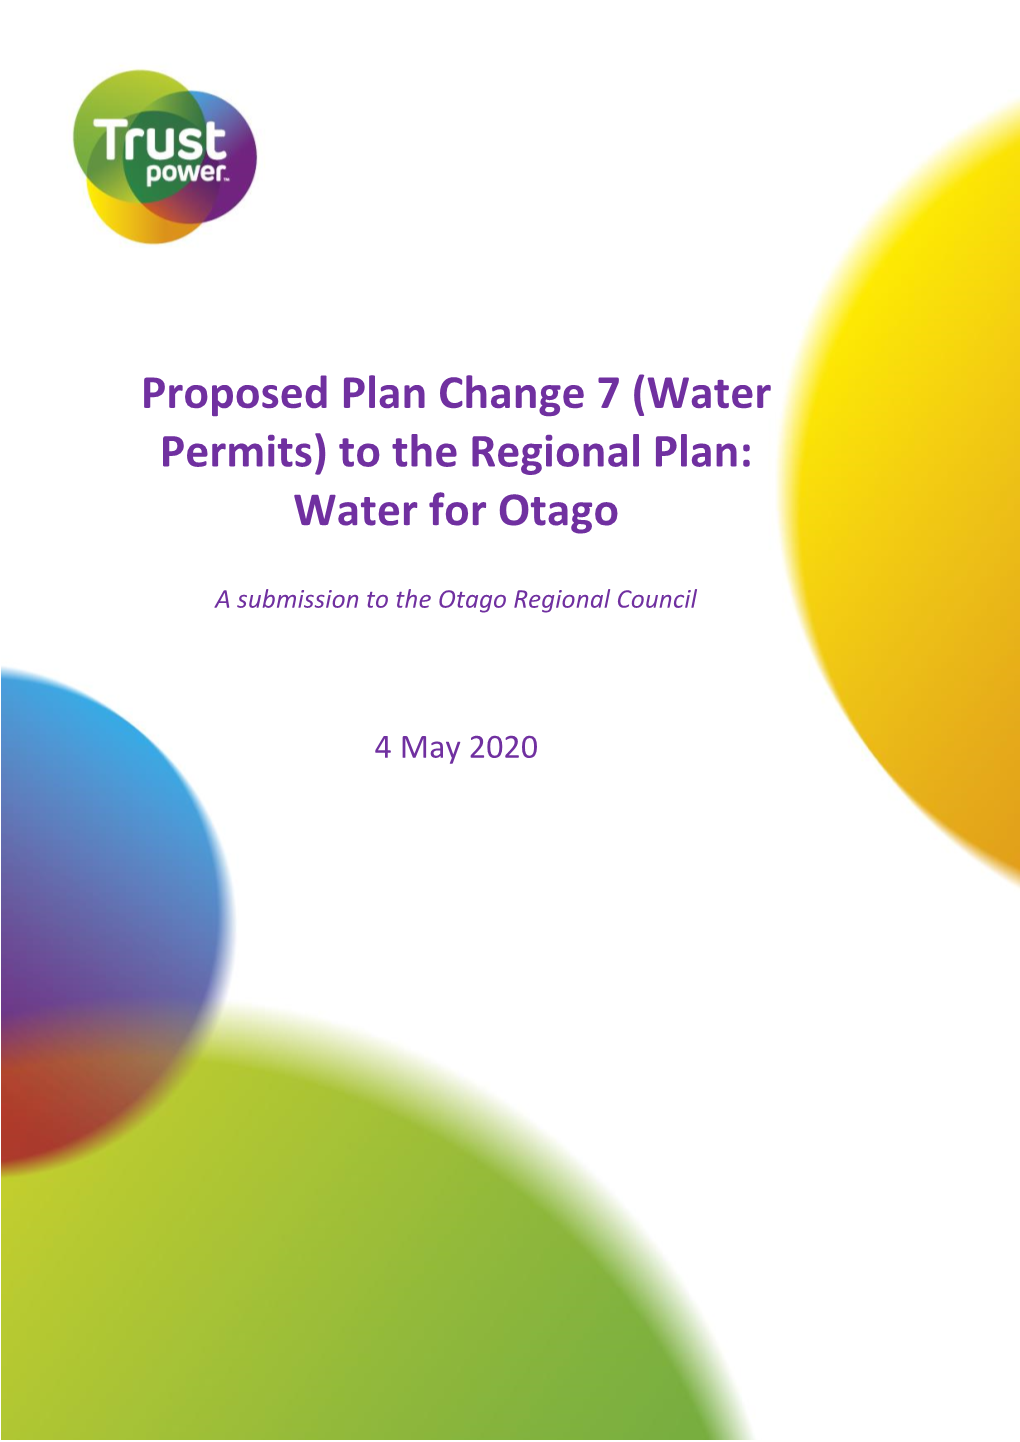 Proposed Plan Change 7 (Water Permits) to the Regional Plan: Water for Otago (“PC7”)